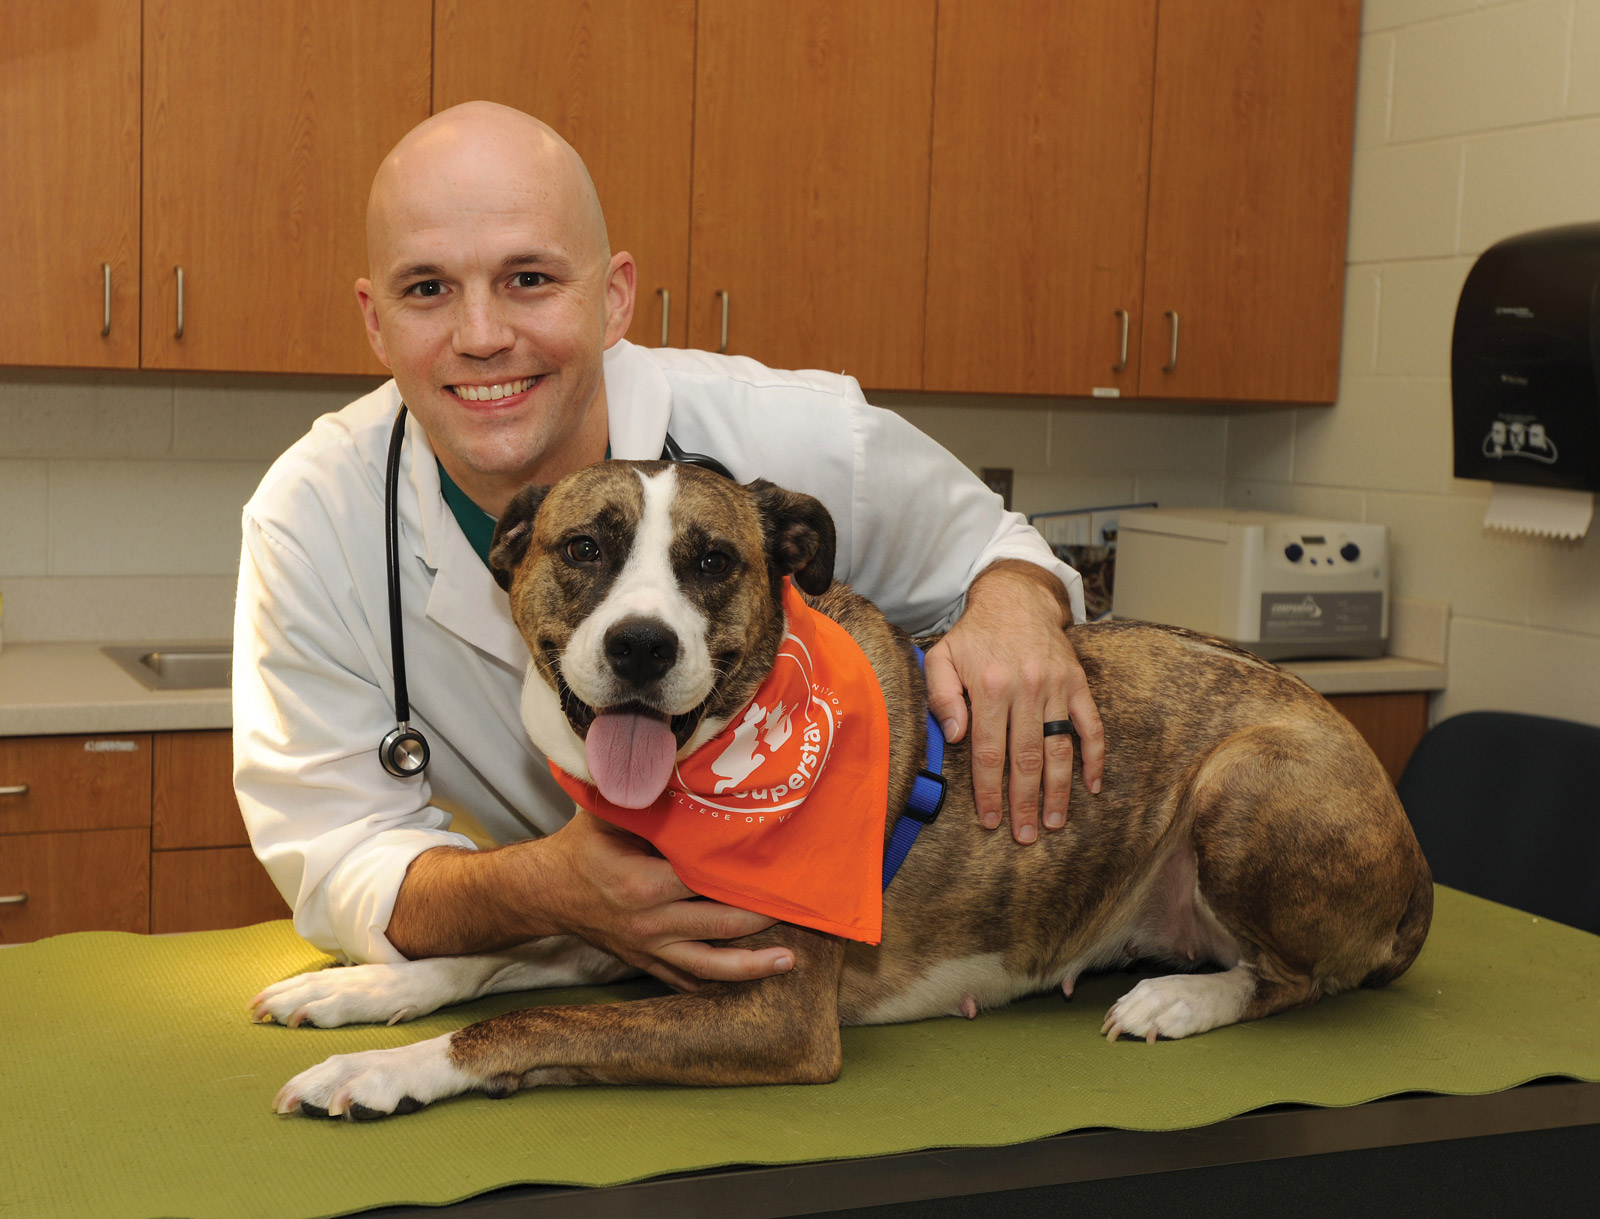 Nathan Chumbler pictured with a dog wearing a UT bandana